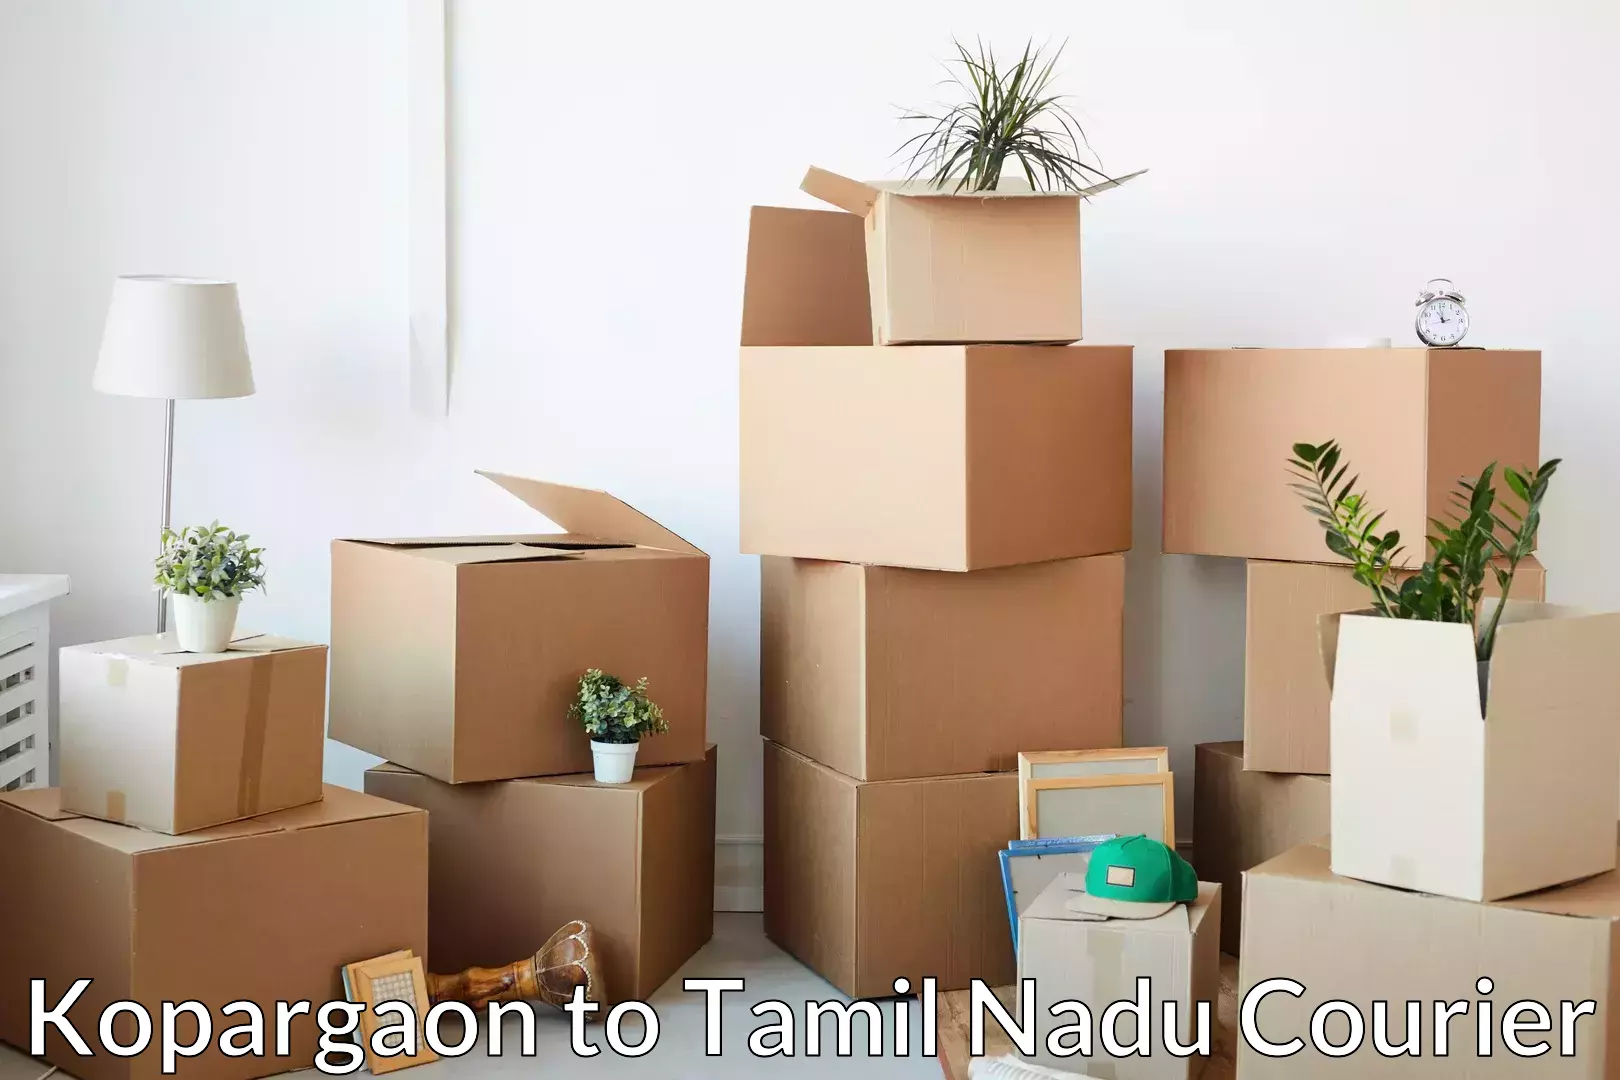 Cost-effective moving options Kopargaon to Tamil Nadu